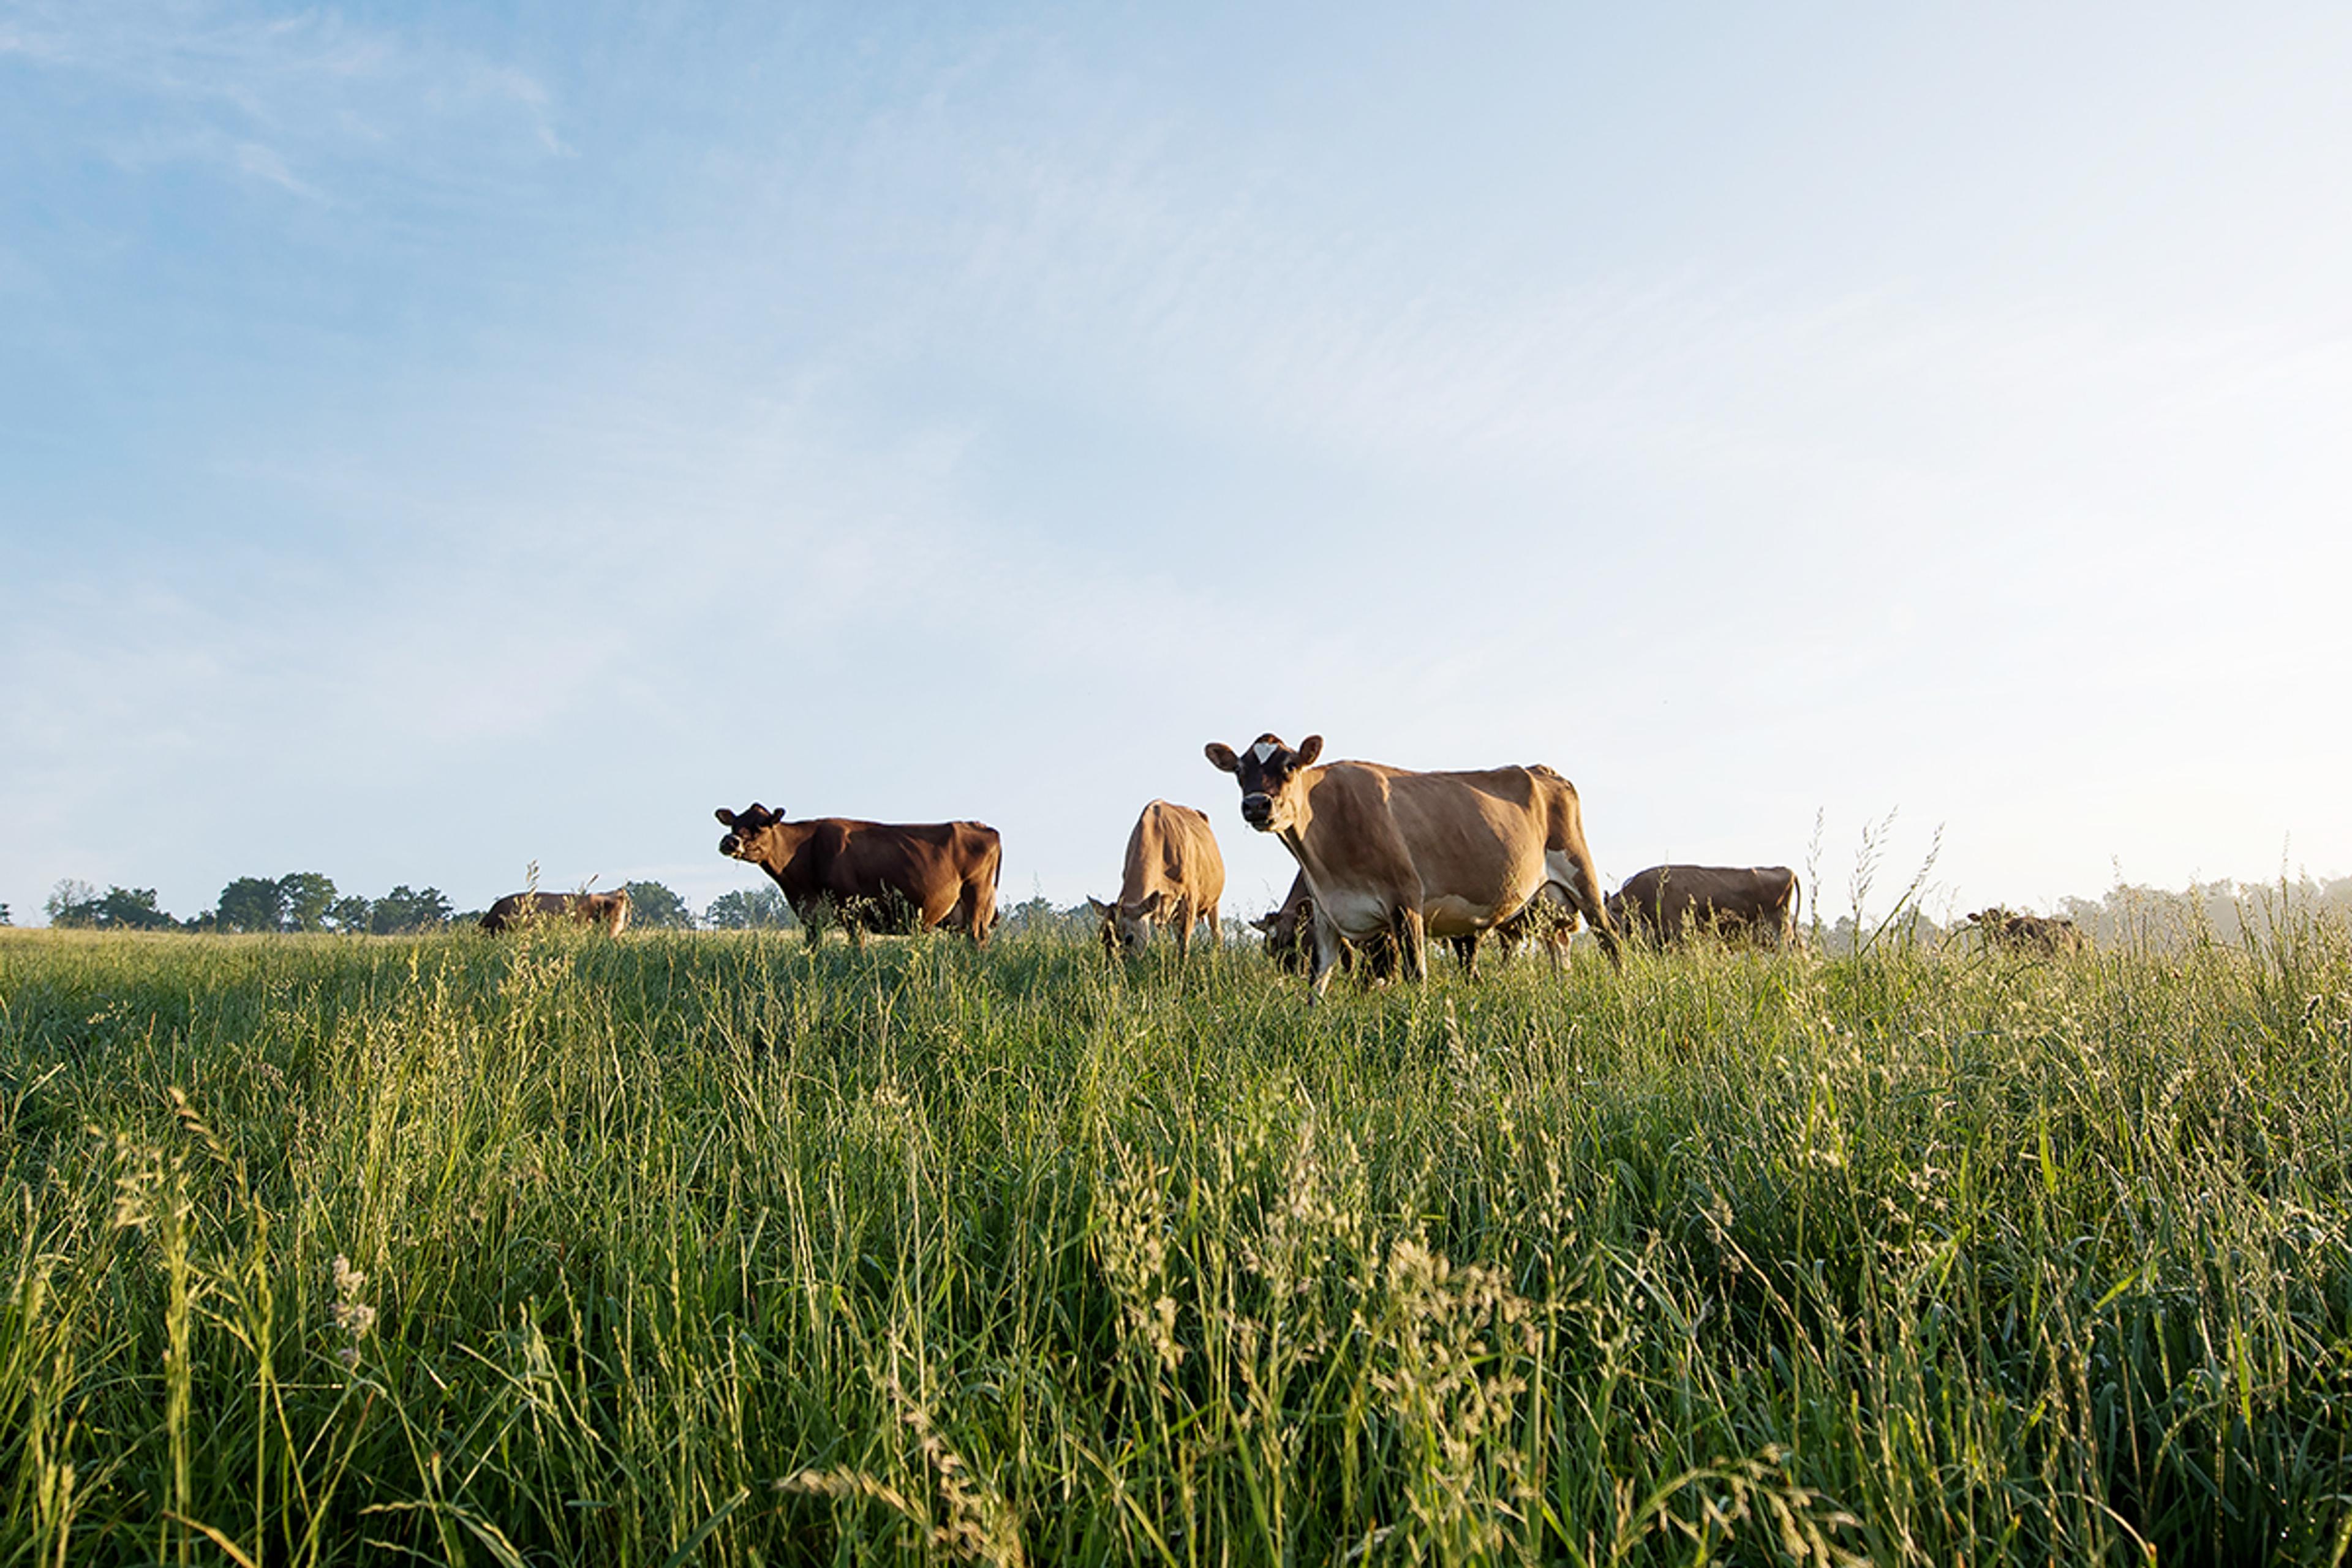 Cows graze on a green pasture at dusk on the Kline family farm in Ohio.